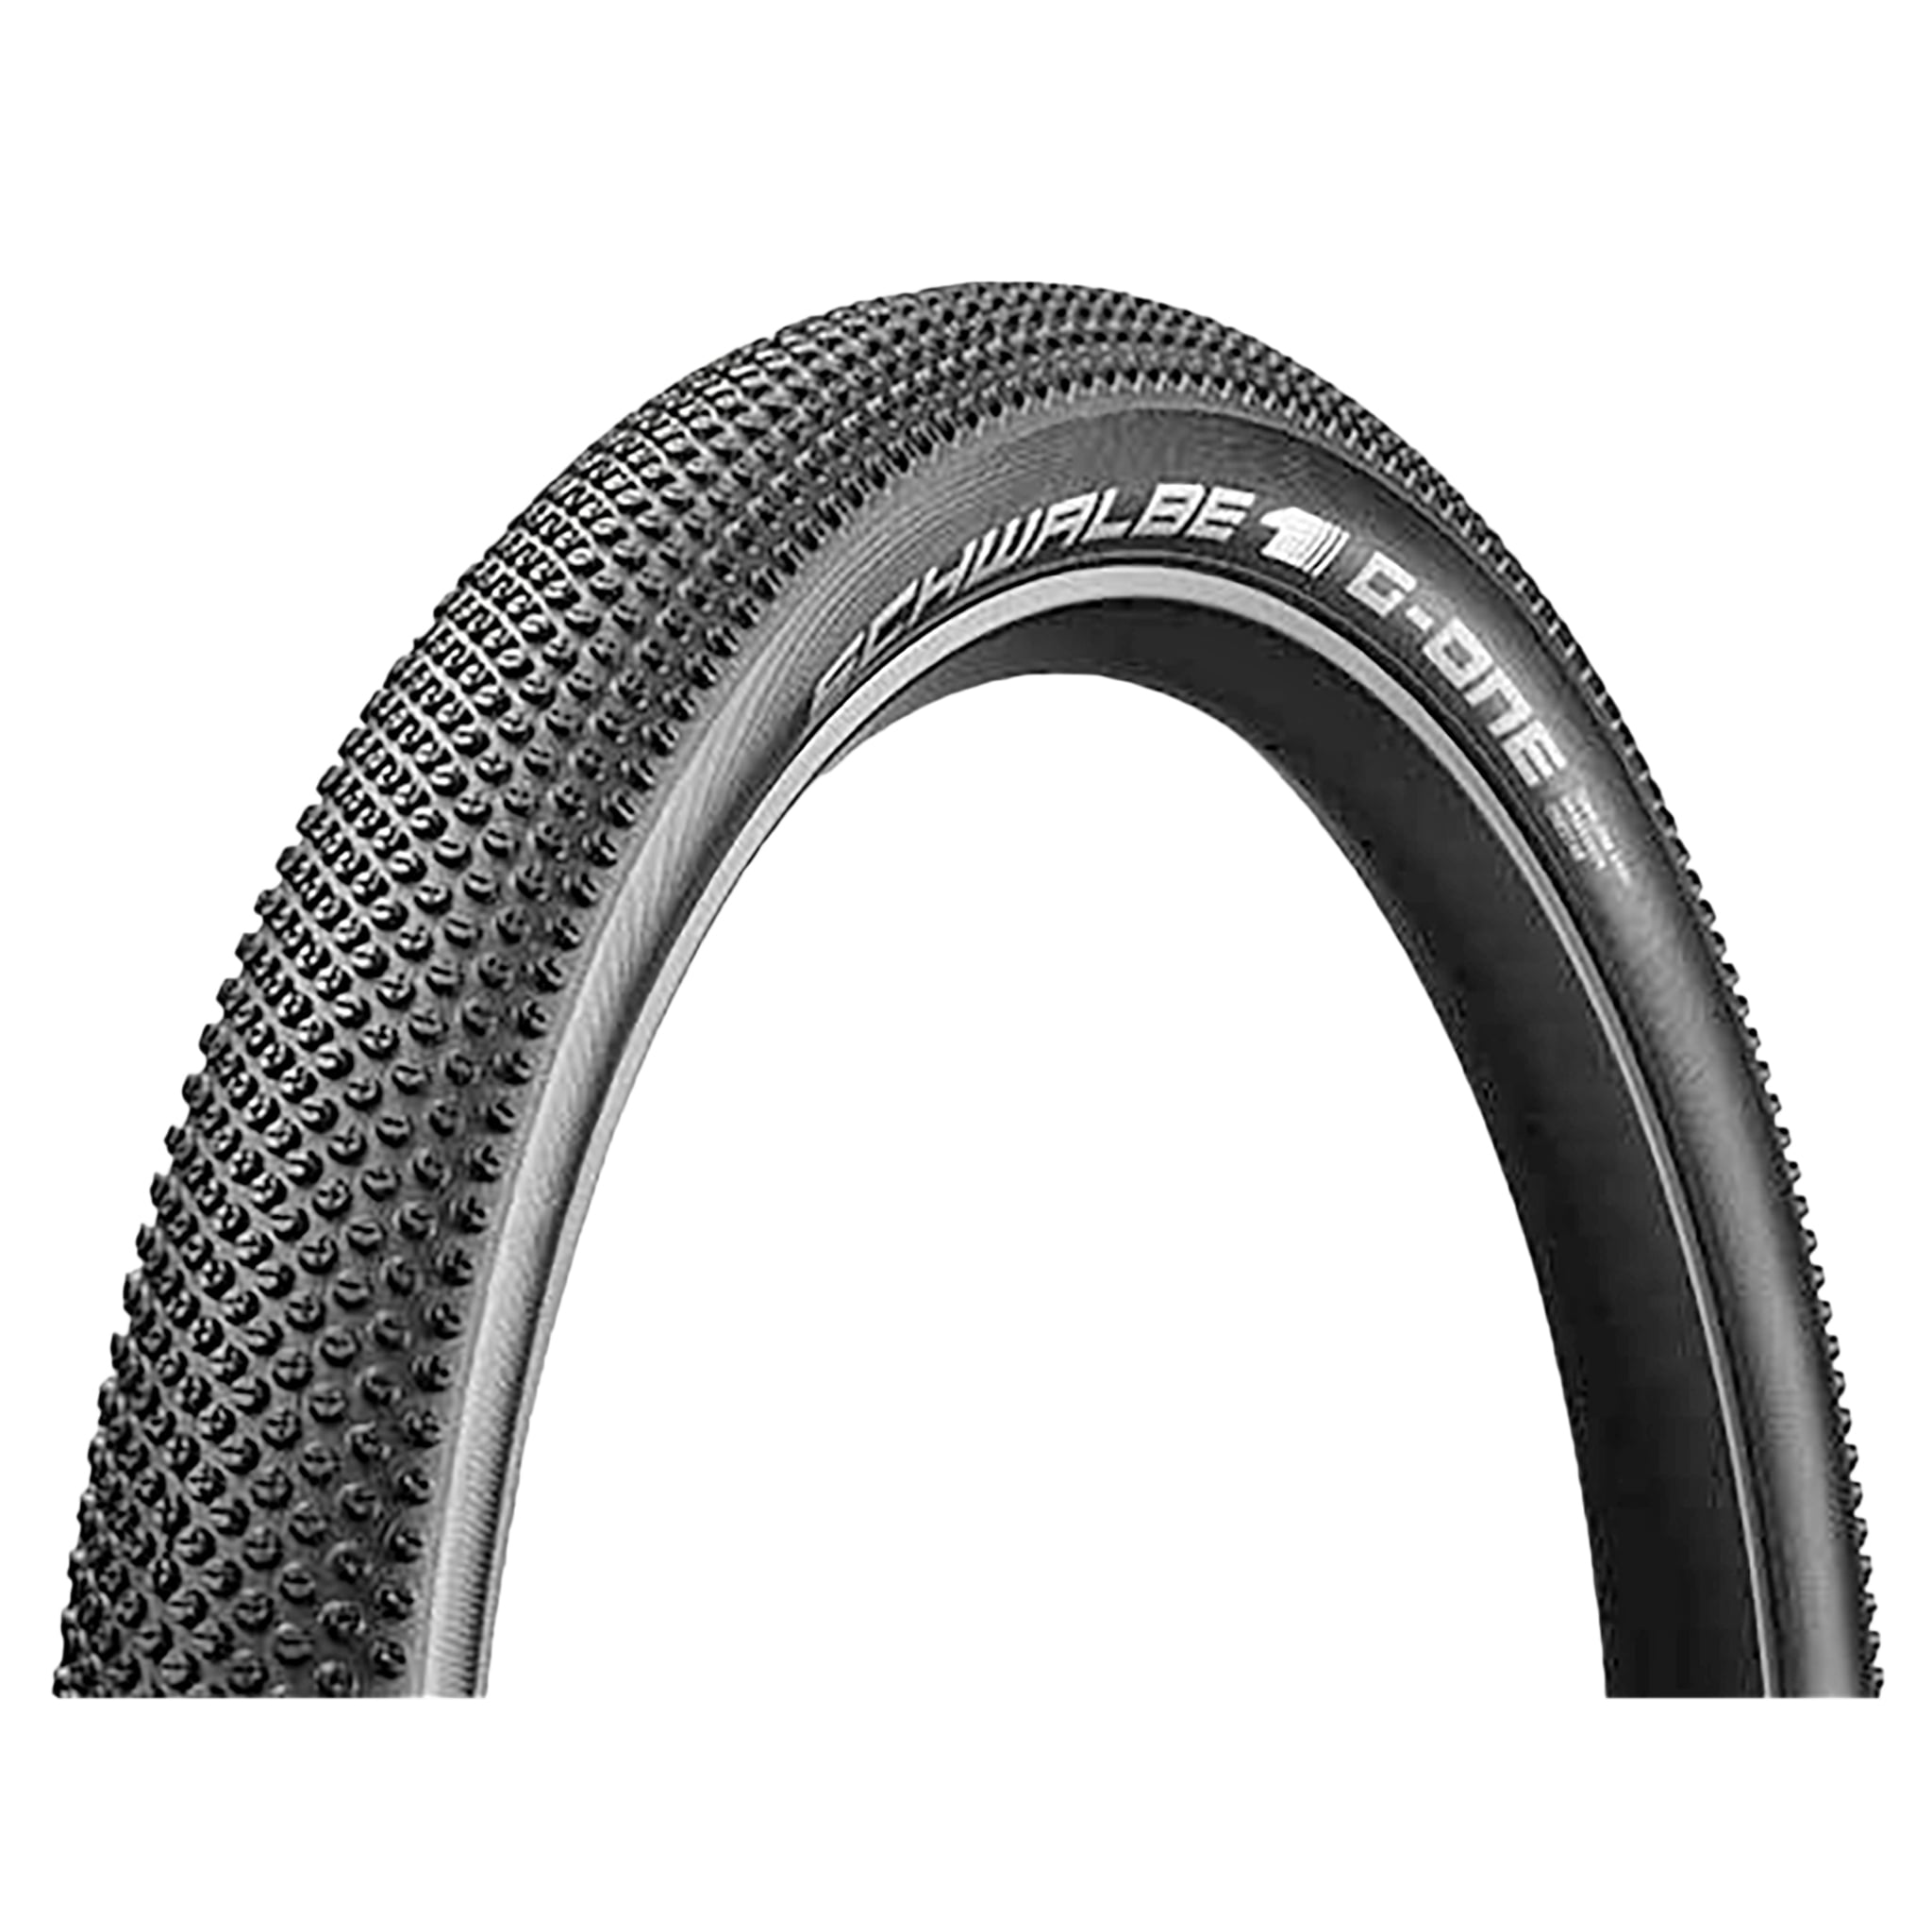 NEW 11600514/11600518 700X23C/ 700X25C Details about   SCHWALBE ONE FOLDING TIRE~BLACK 